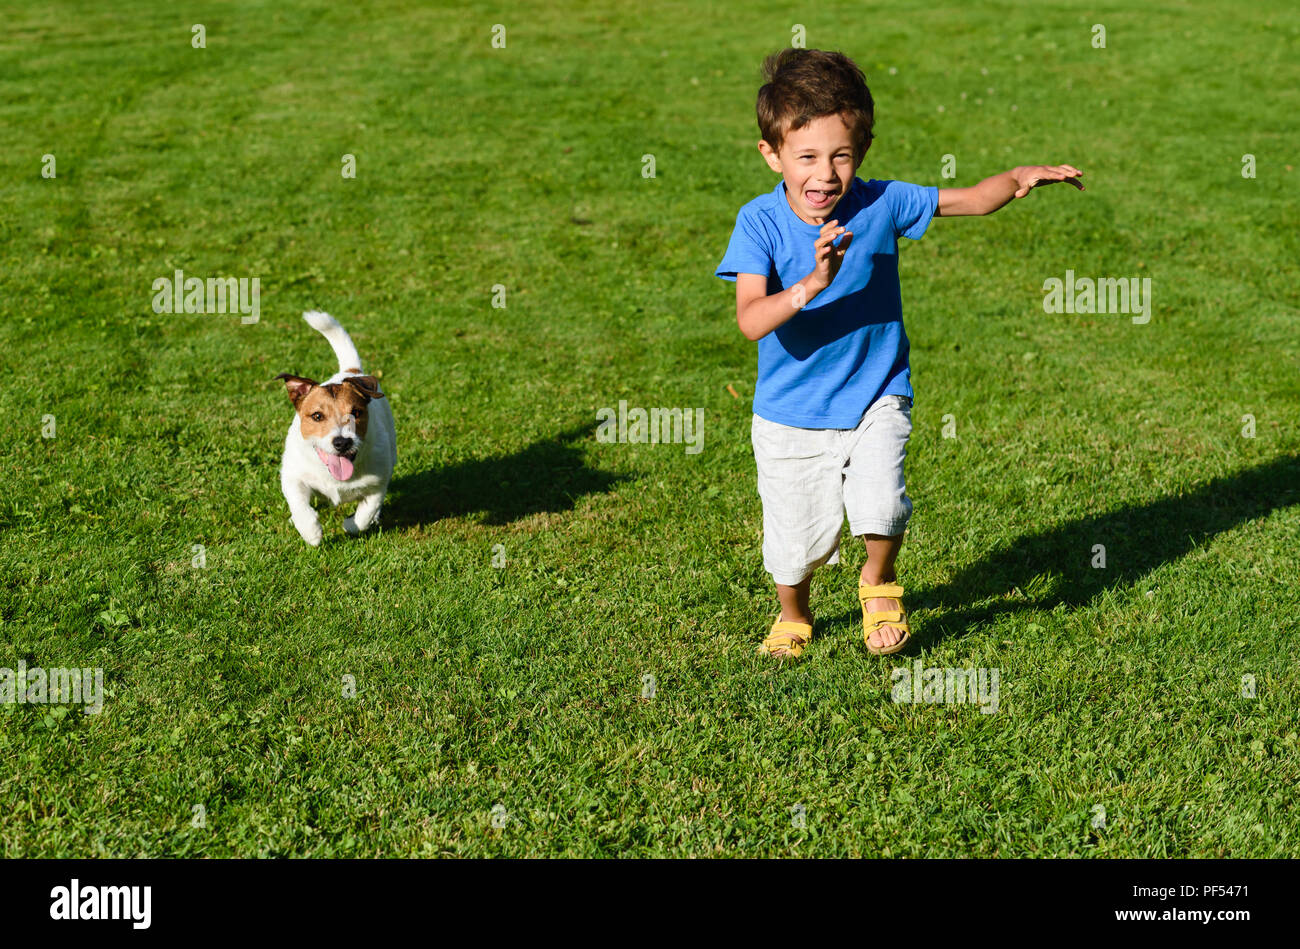 Kid playing with dog on green grass lawn dashing and racing Stock Photo